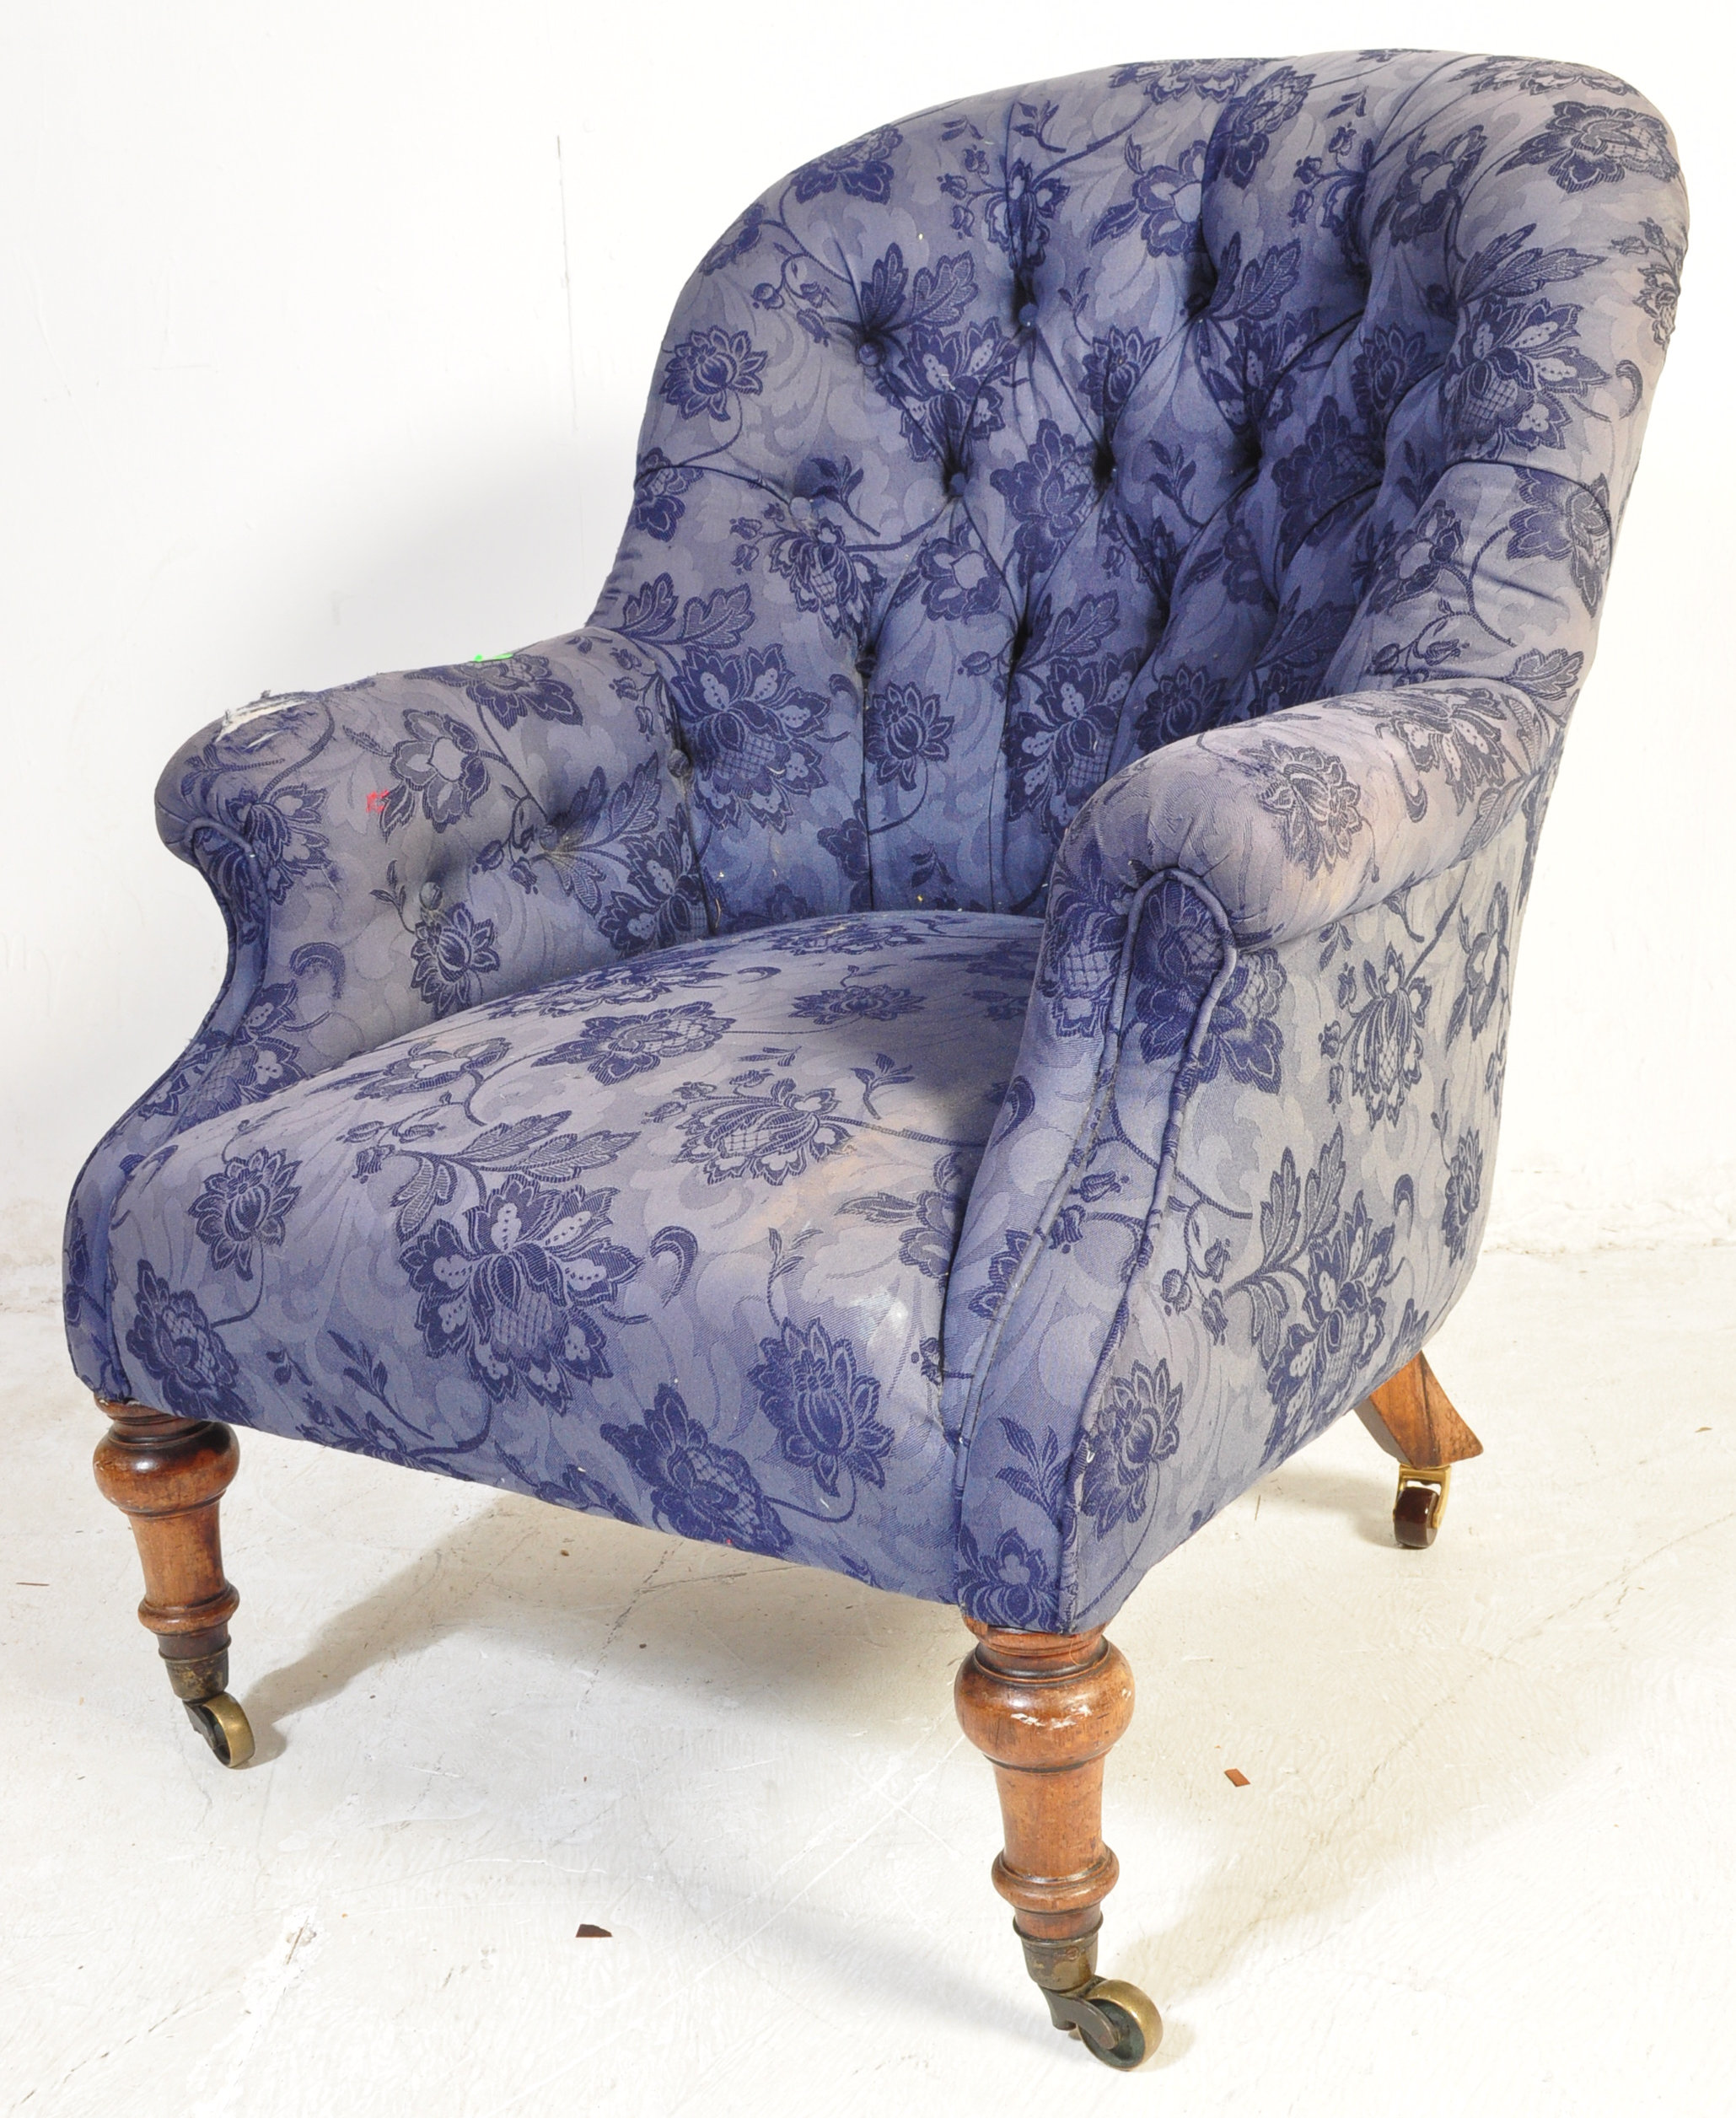 VICTORIAN 19TH CENTURY UPHOLSTERED ARMCHAIR